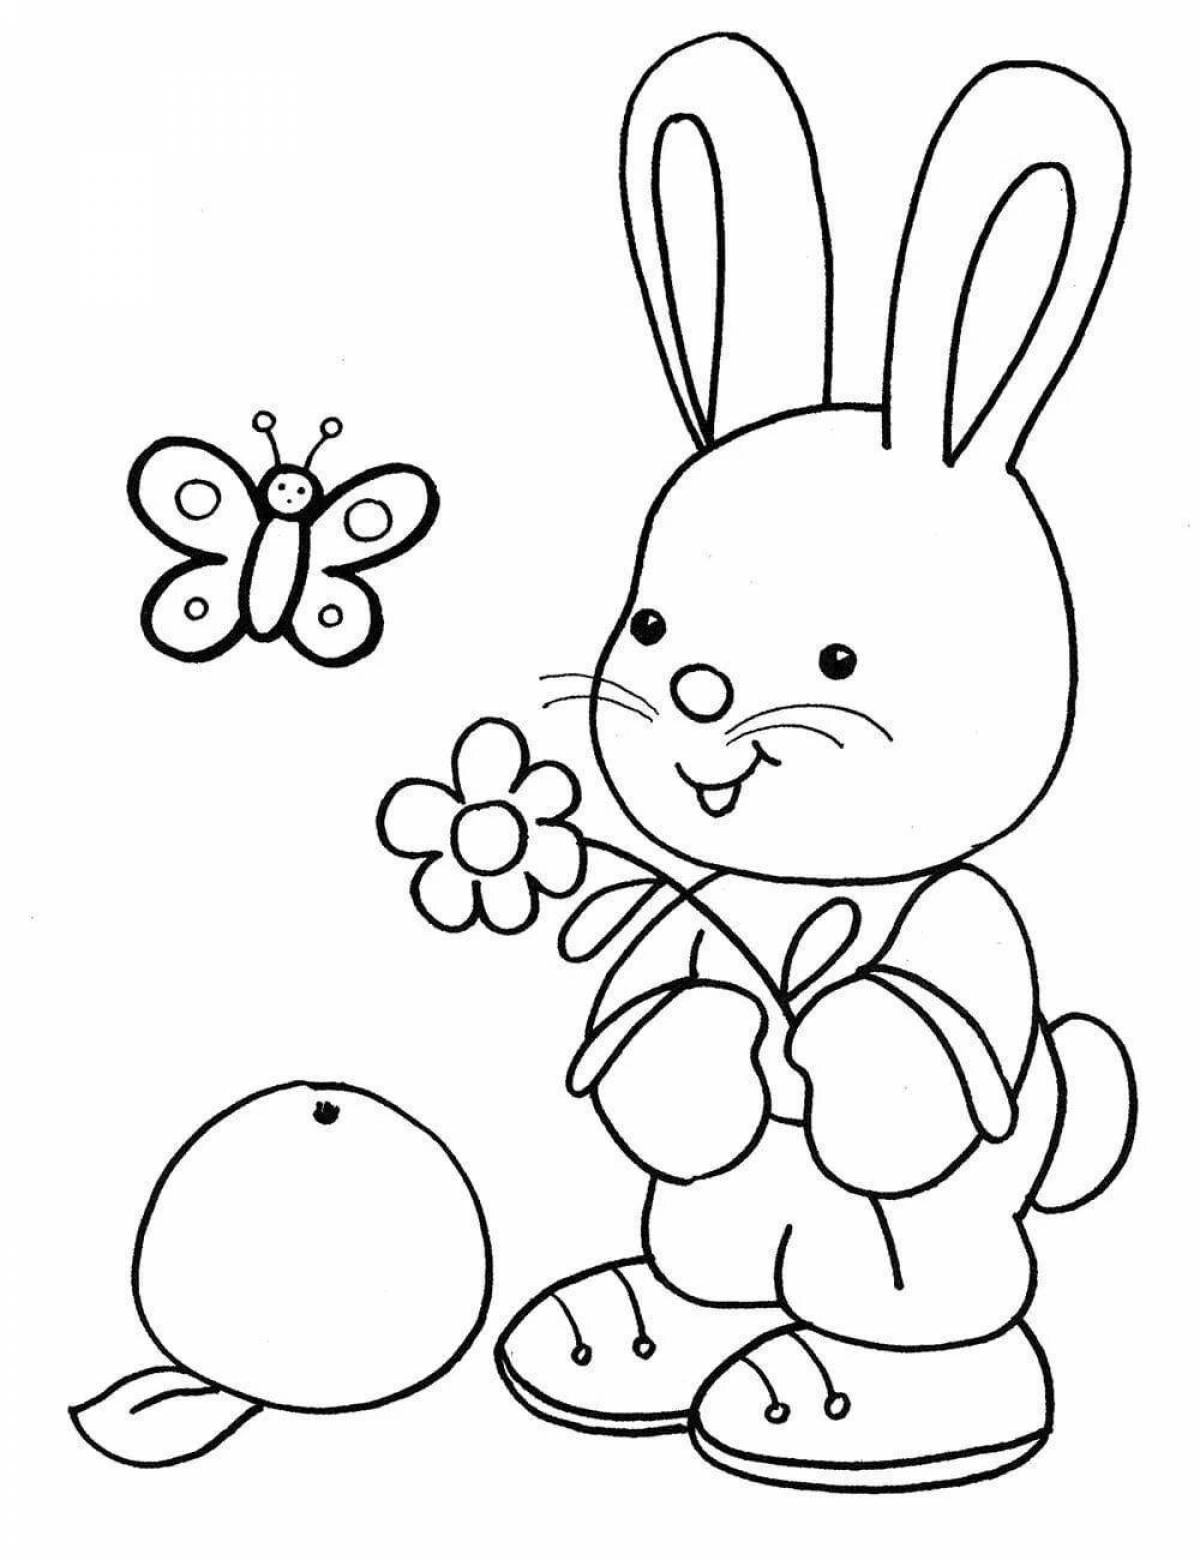 Cute bunny coloring book for kids 3 4